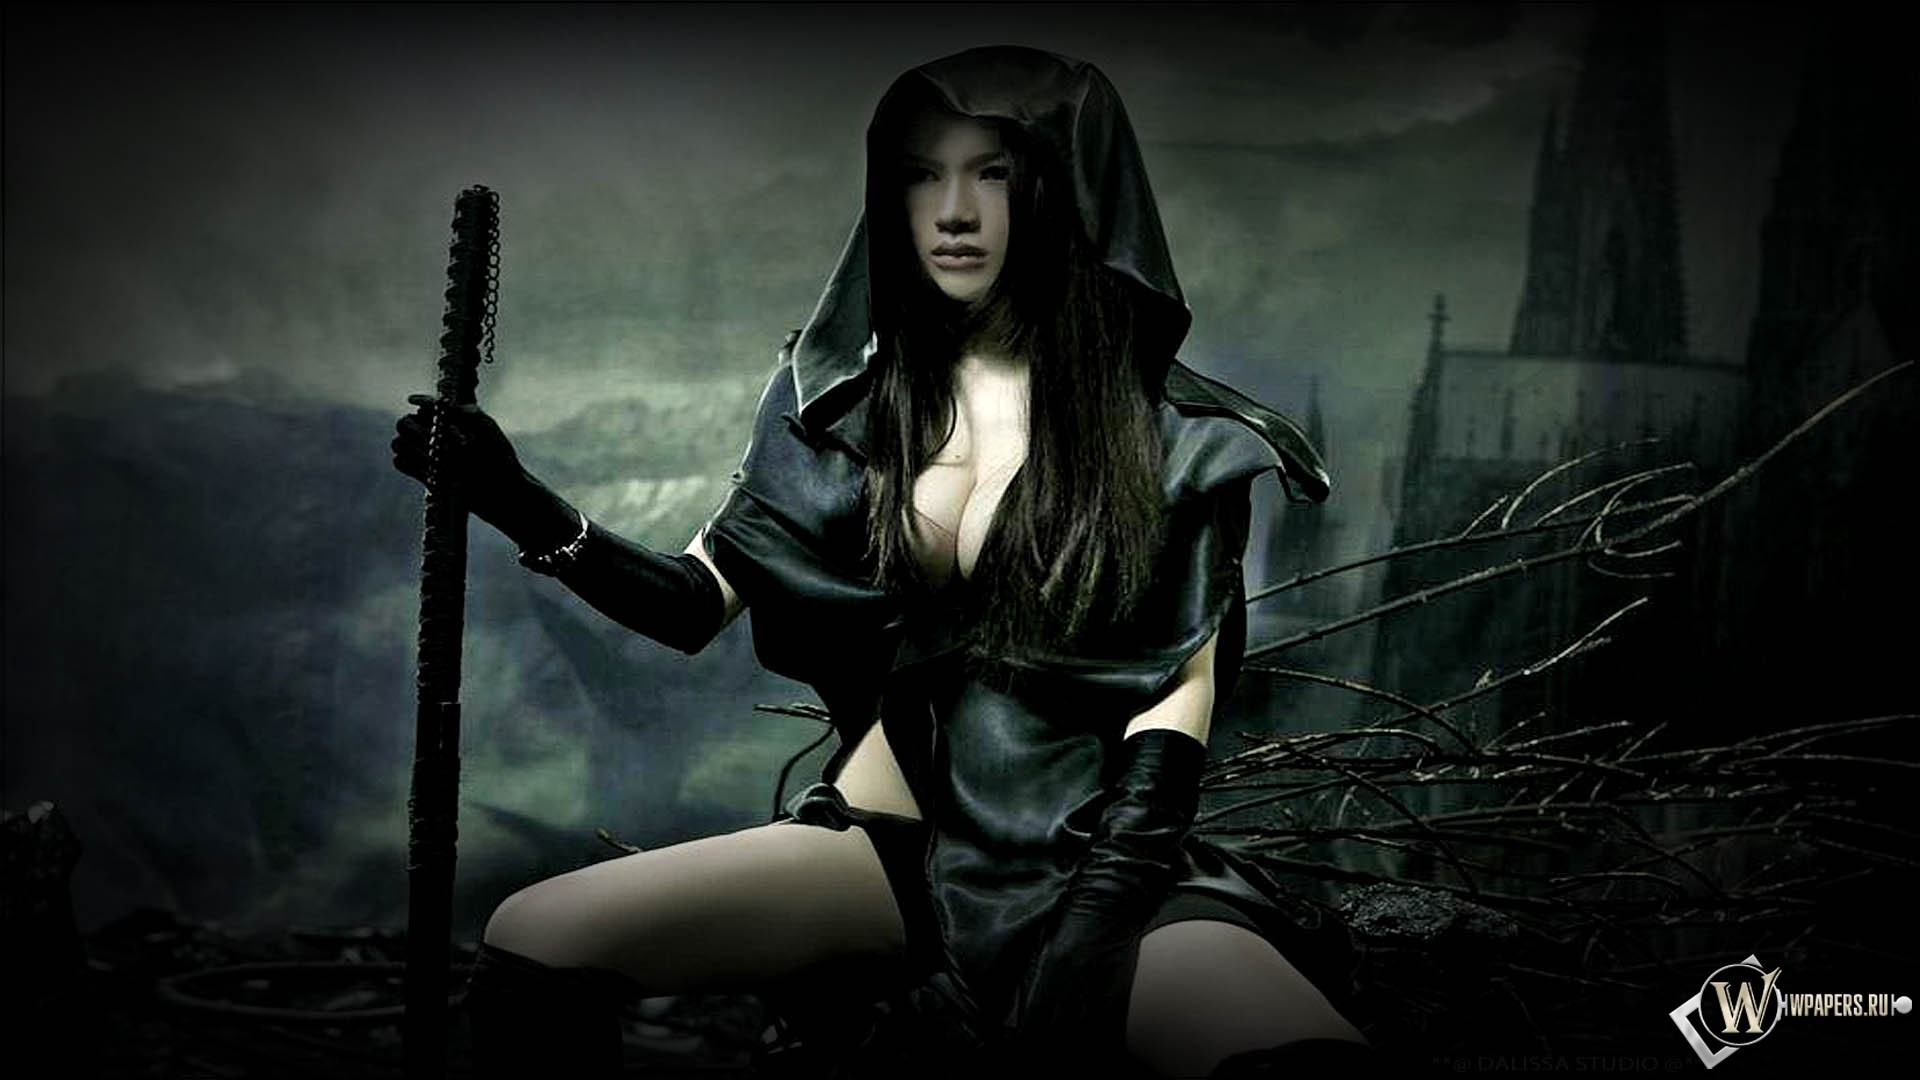 1920x1080 gothic images | Gothic Goth Girl wallpaper | Cool shit | Pinterest .